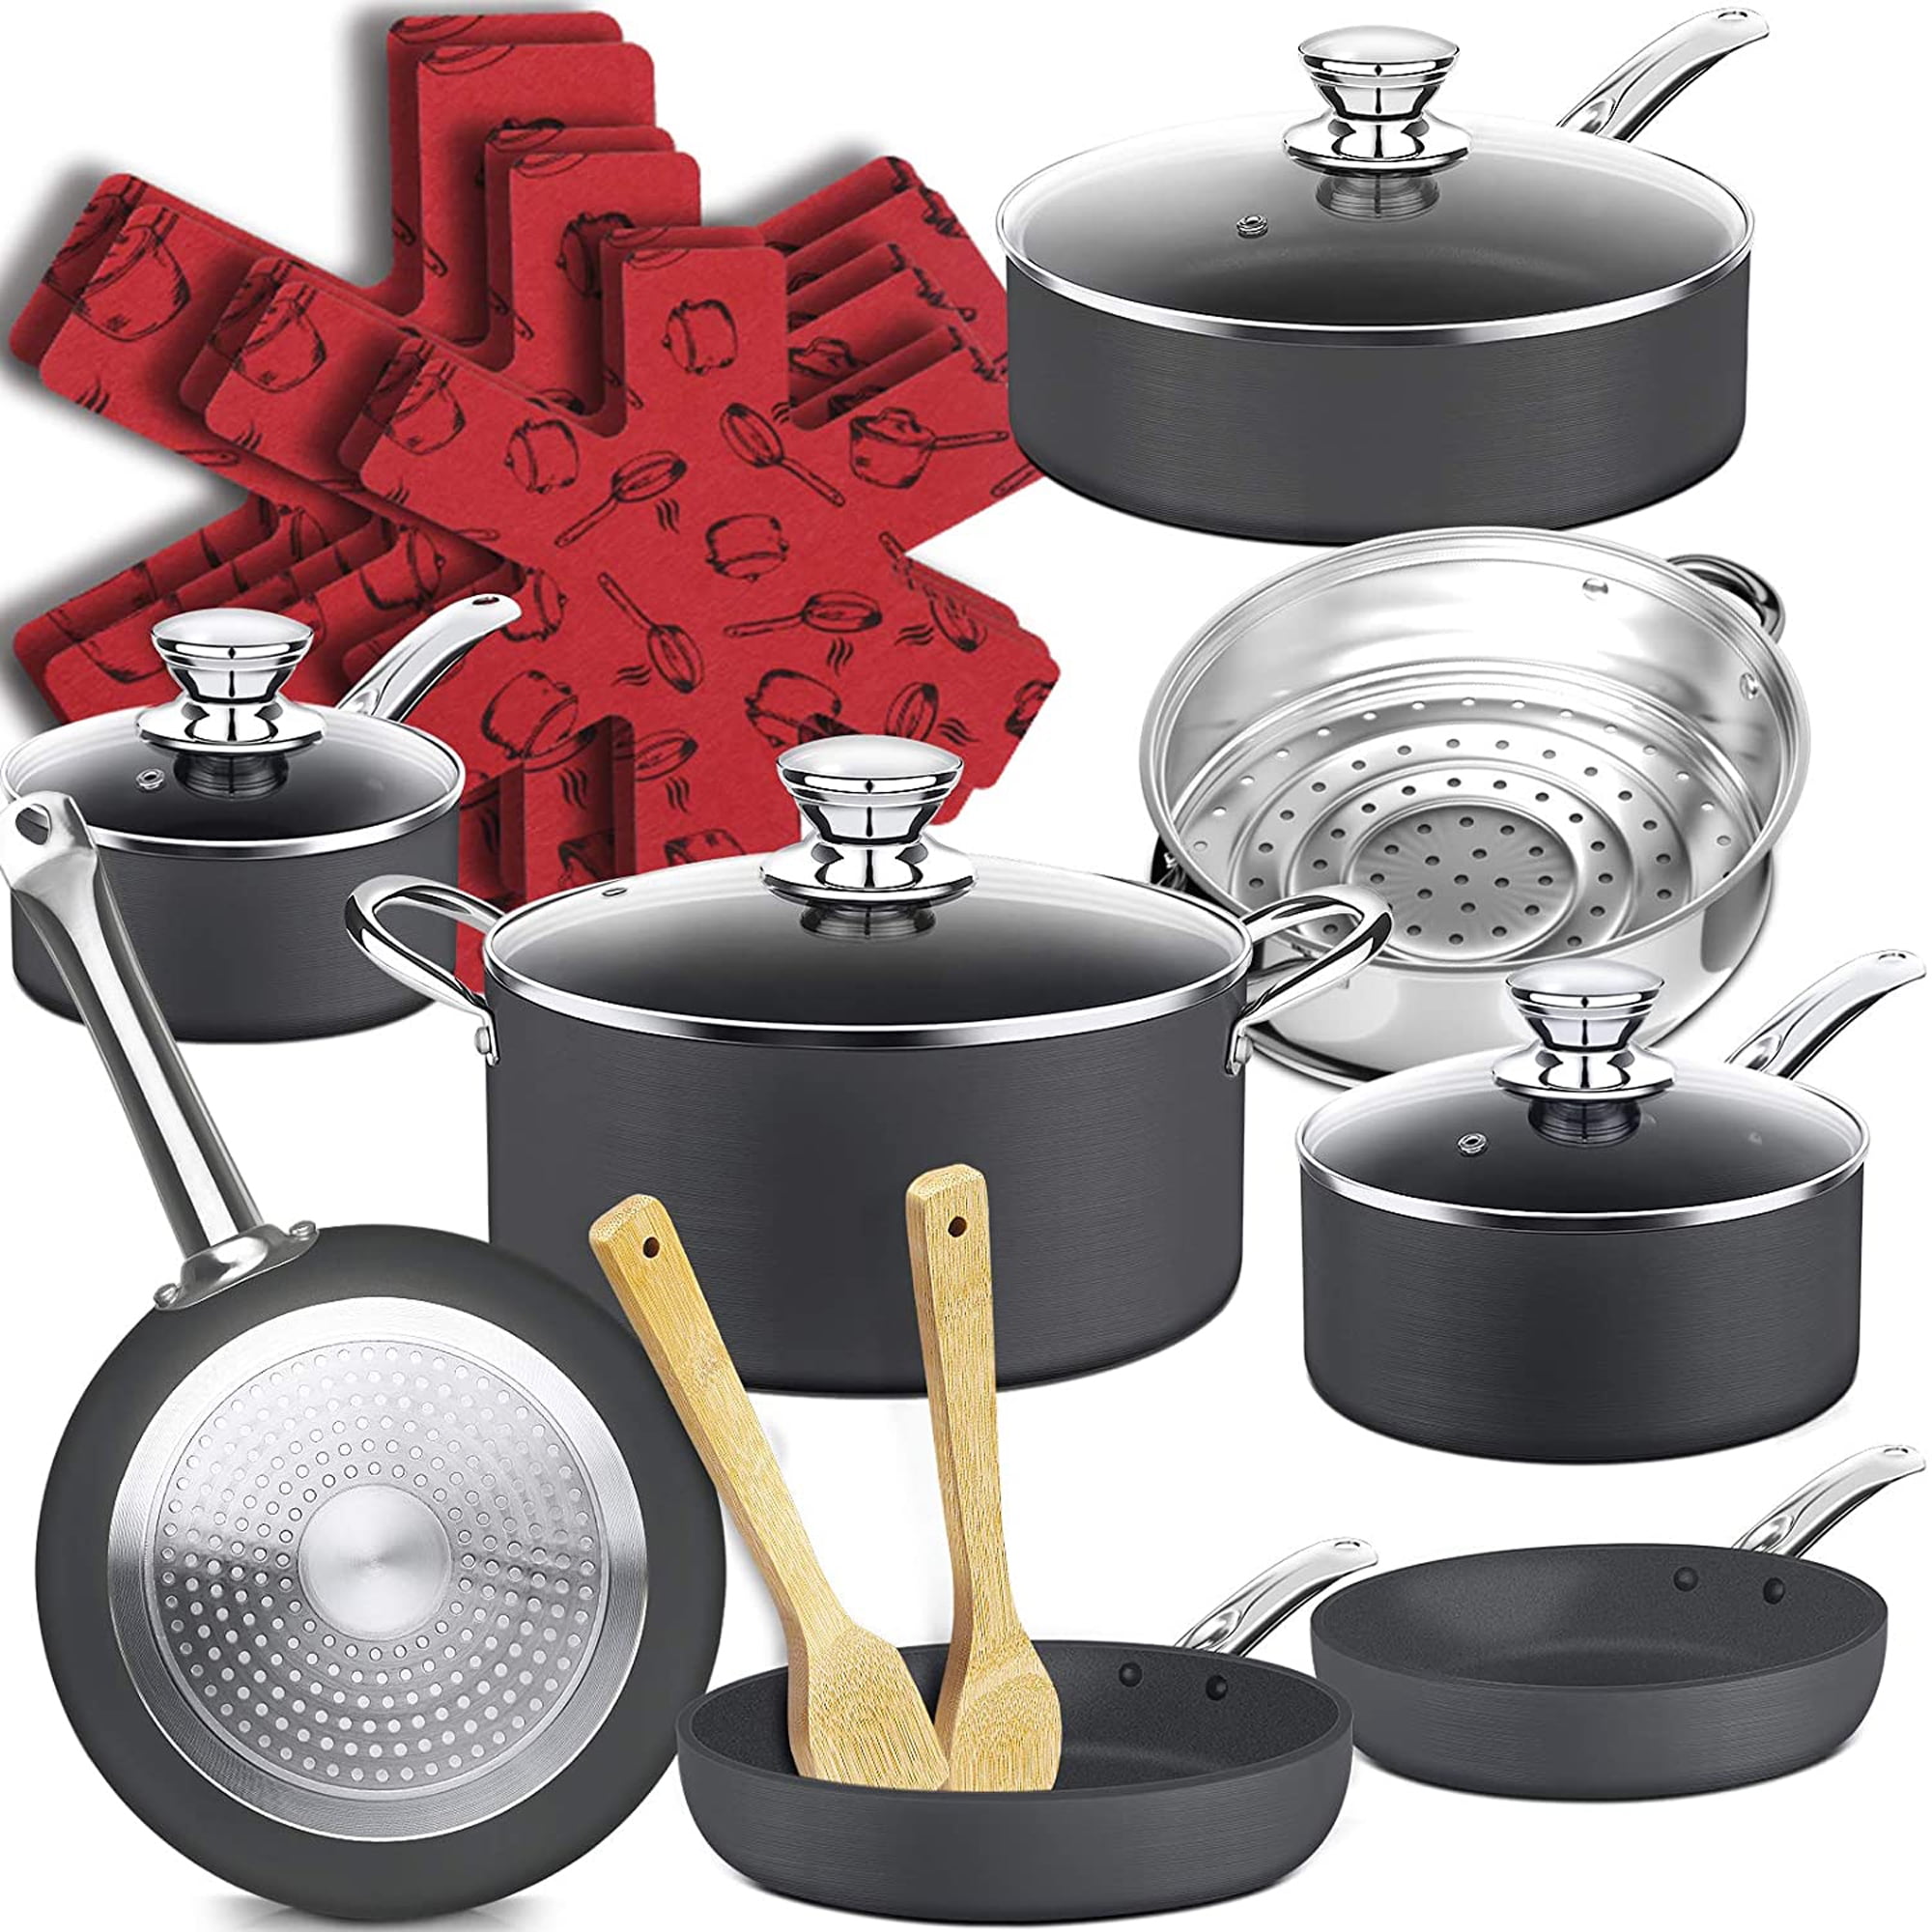 is hard anodized cookware safe